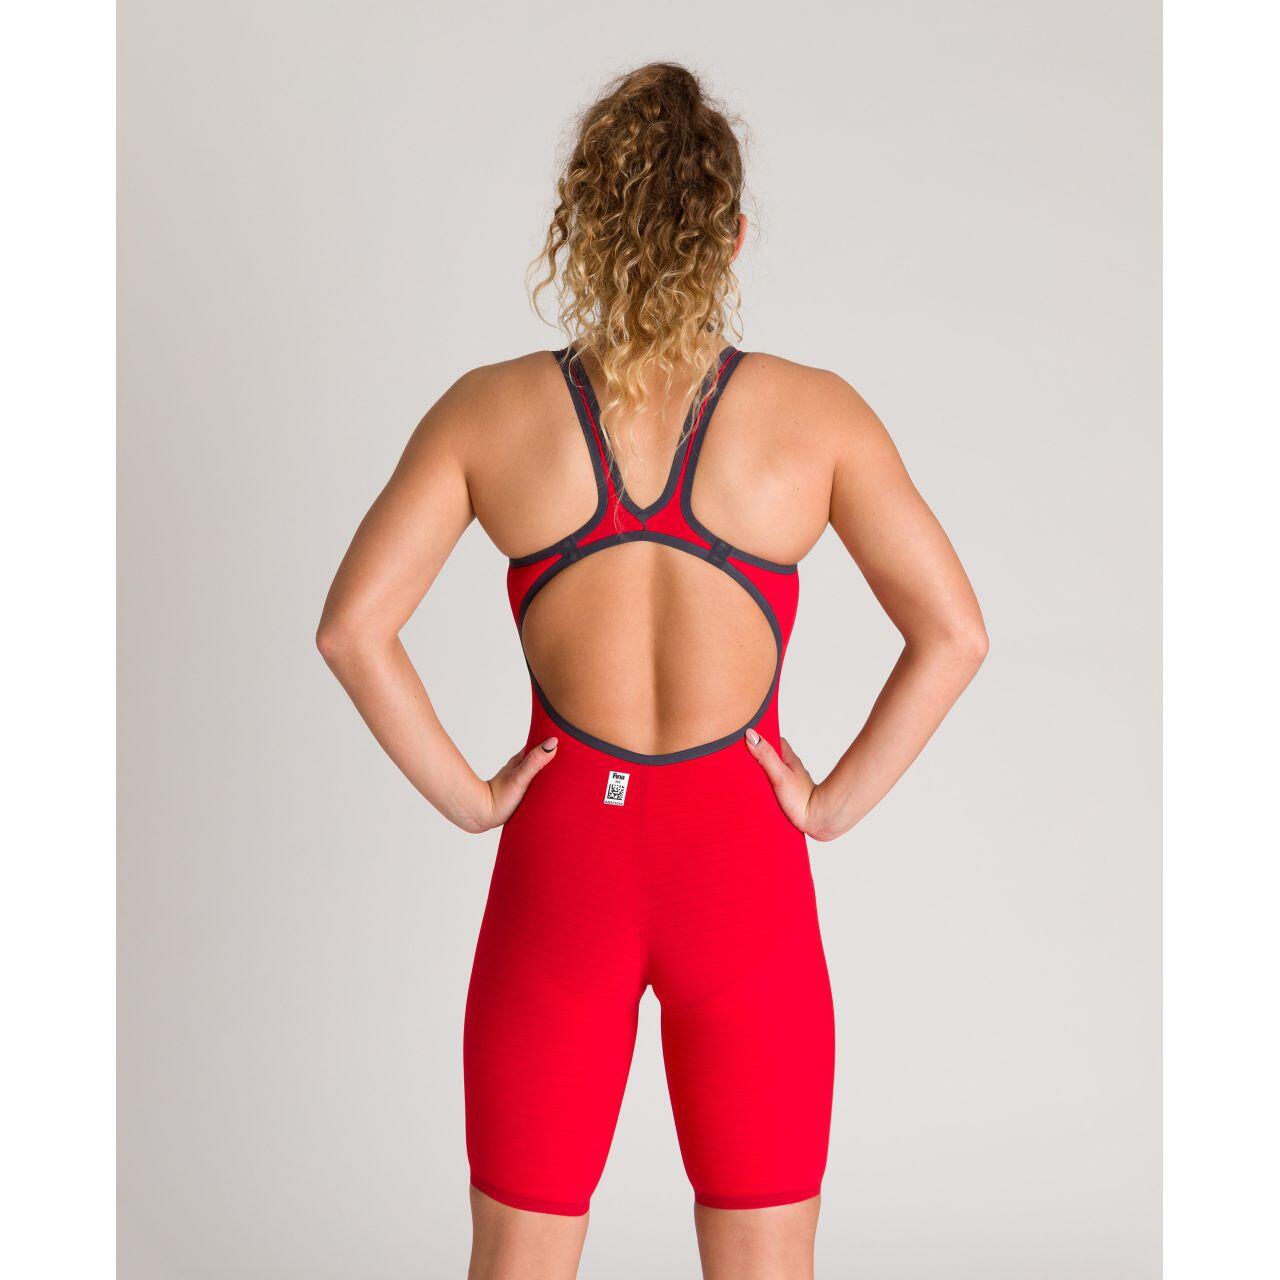 Arena Powerskin Carbon Air² Open Back Kneeskin - Red / Blue 4/5